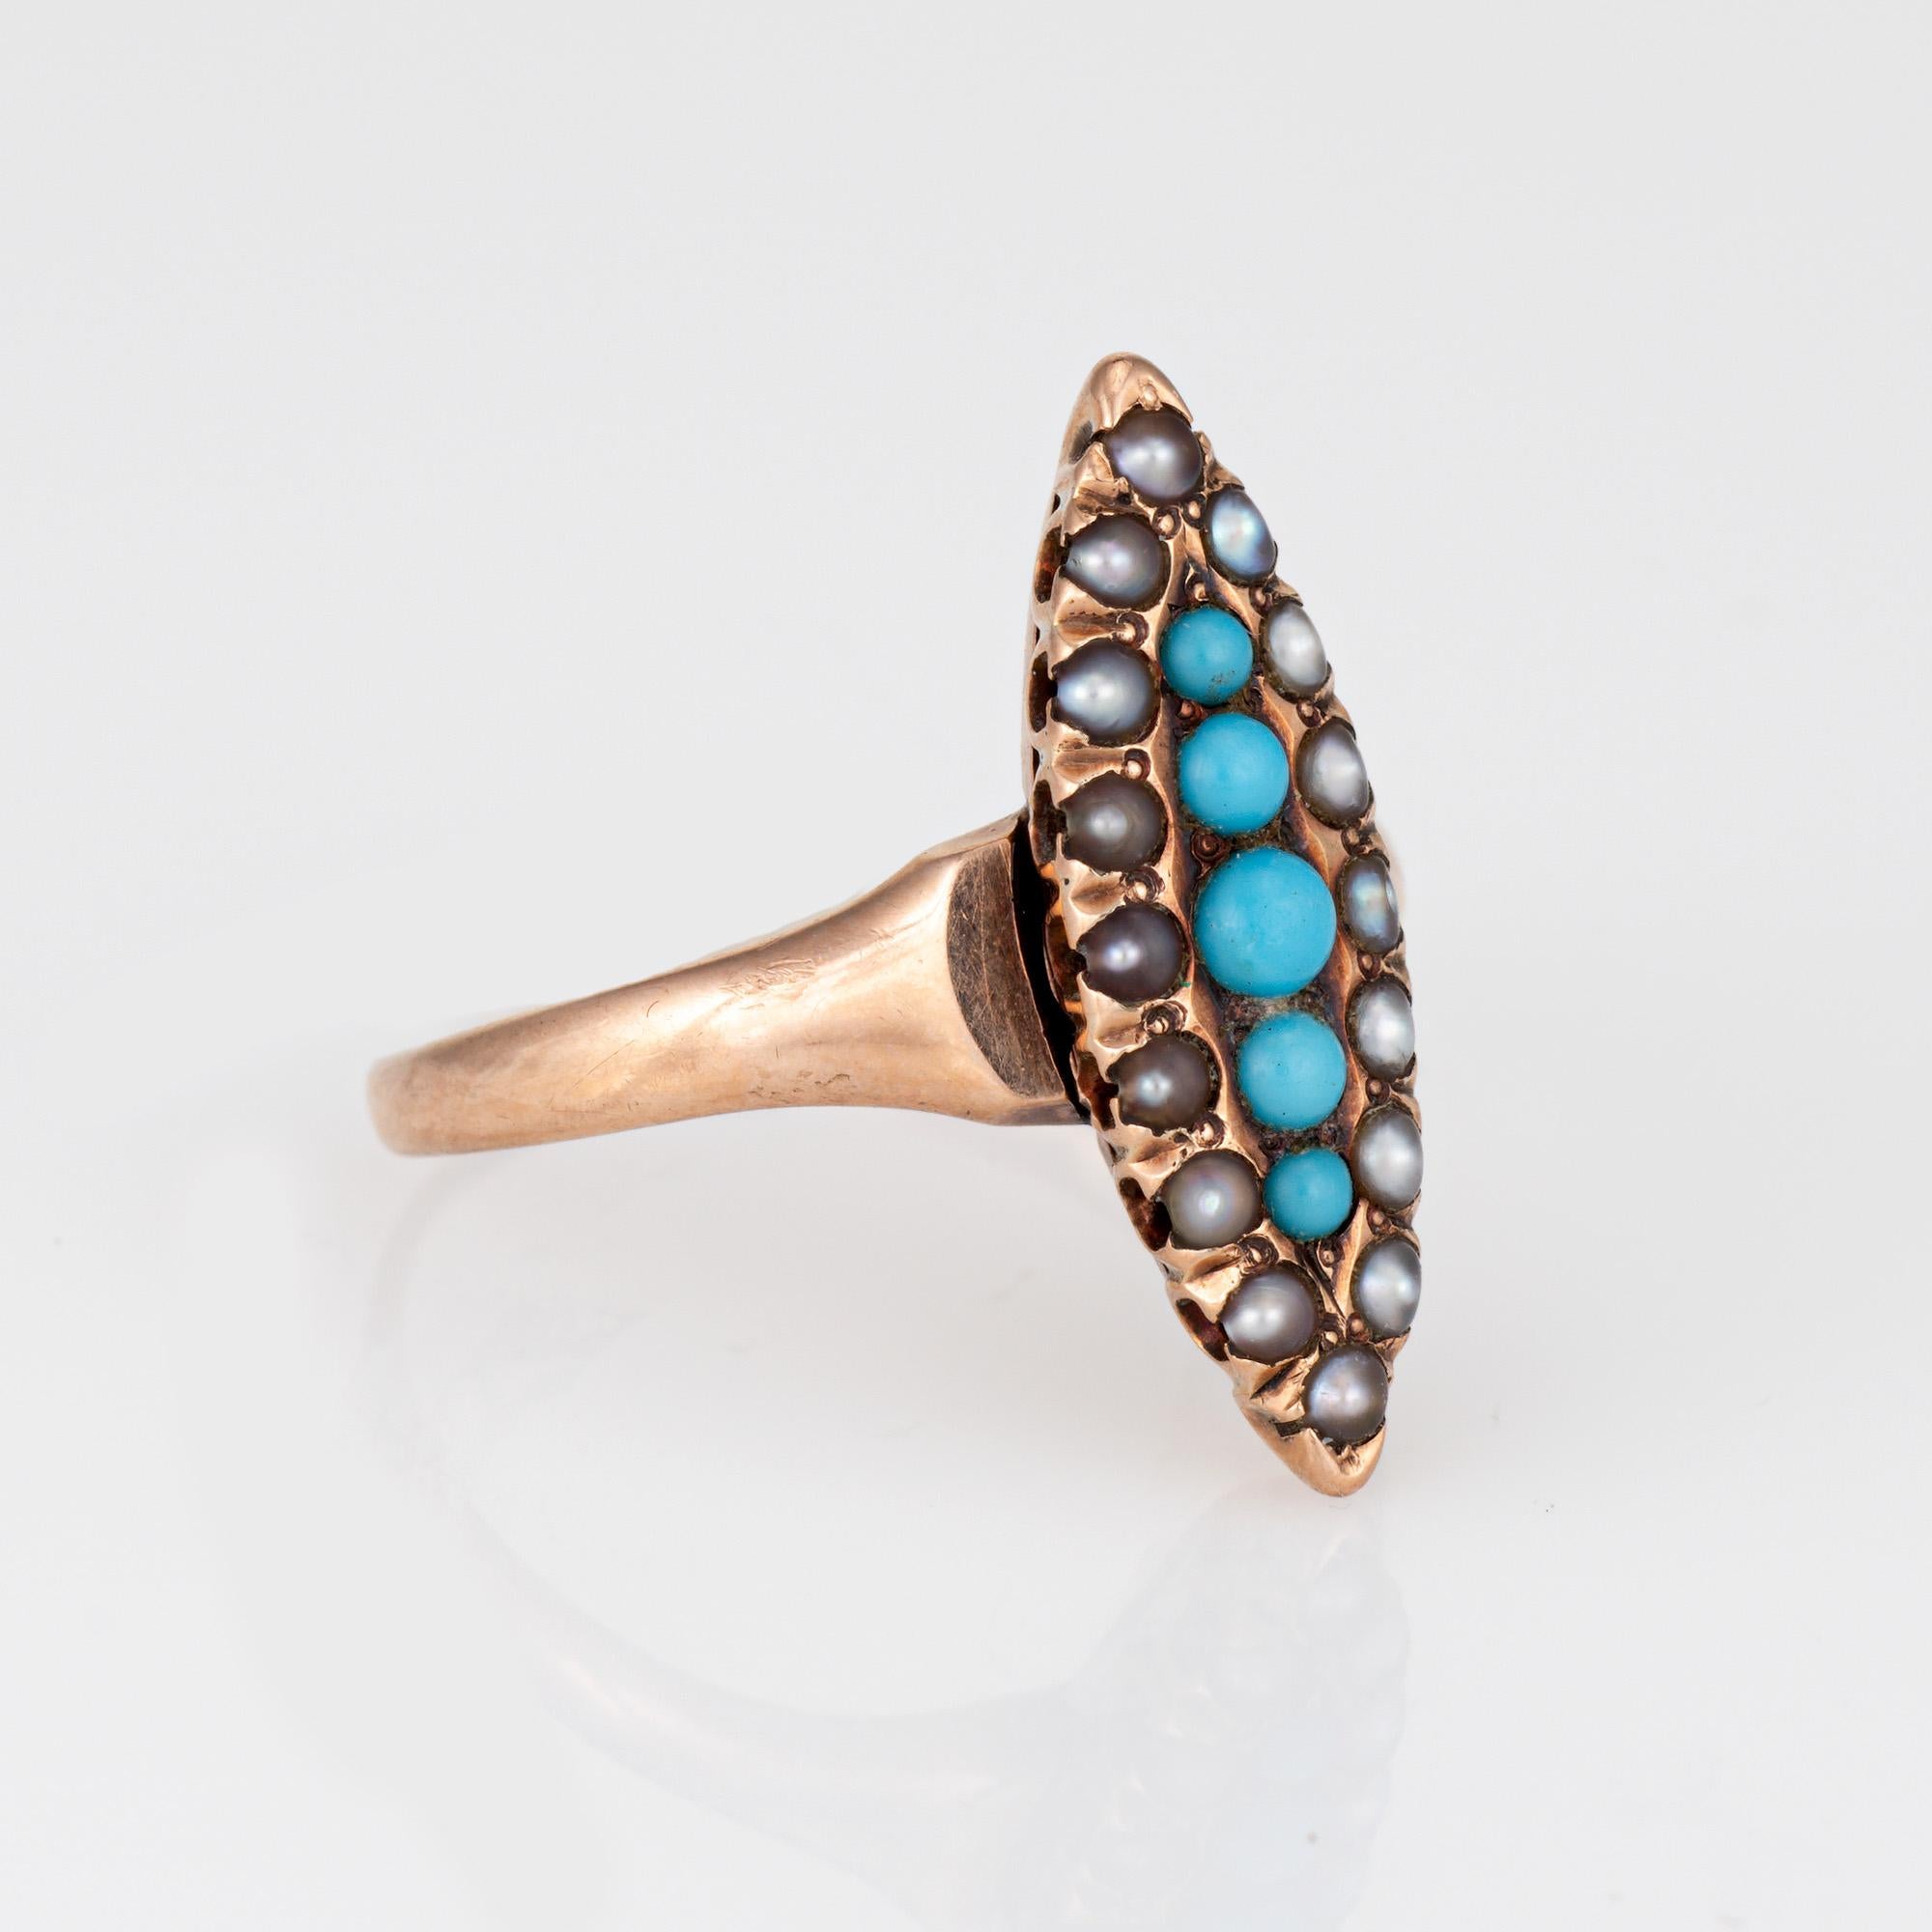 Cabochon Antique Victorian Navette Ring Turquoise Seed Pearl 10k Yellow Gold Sz 5.75 For Sale